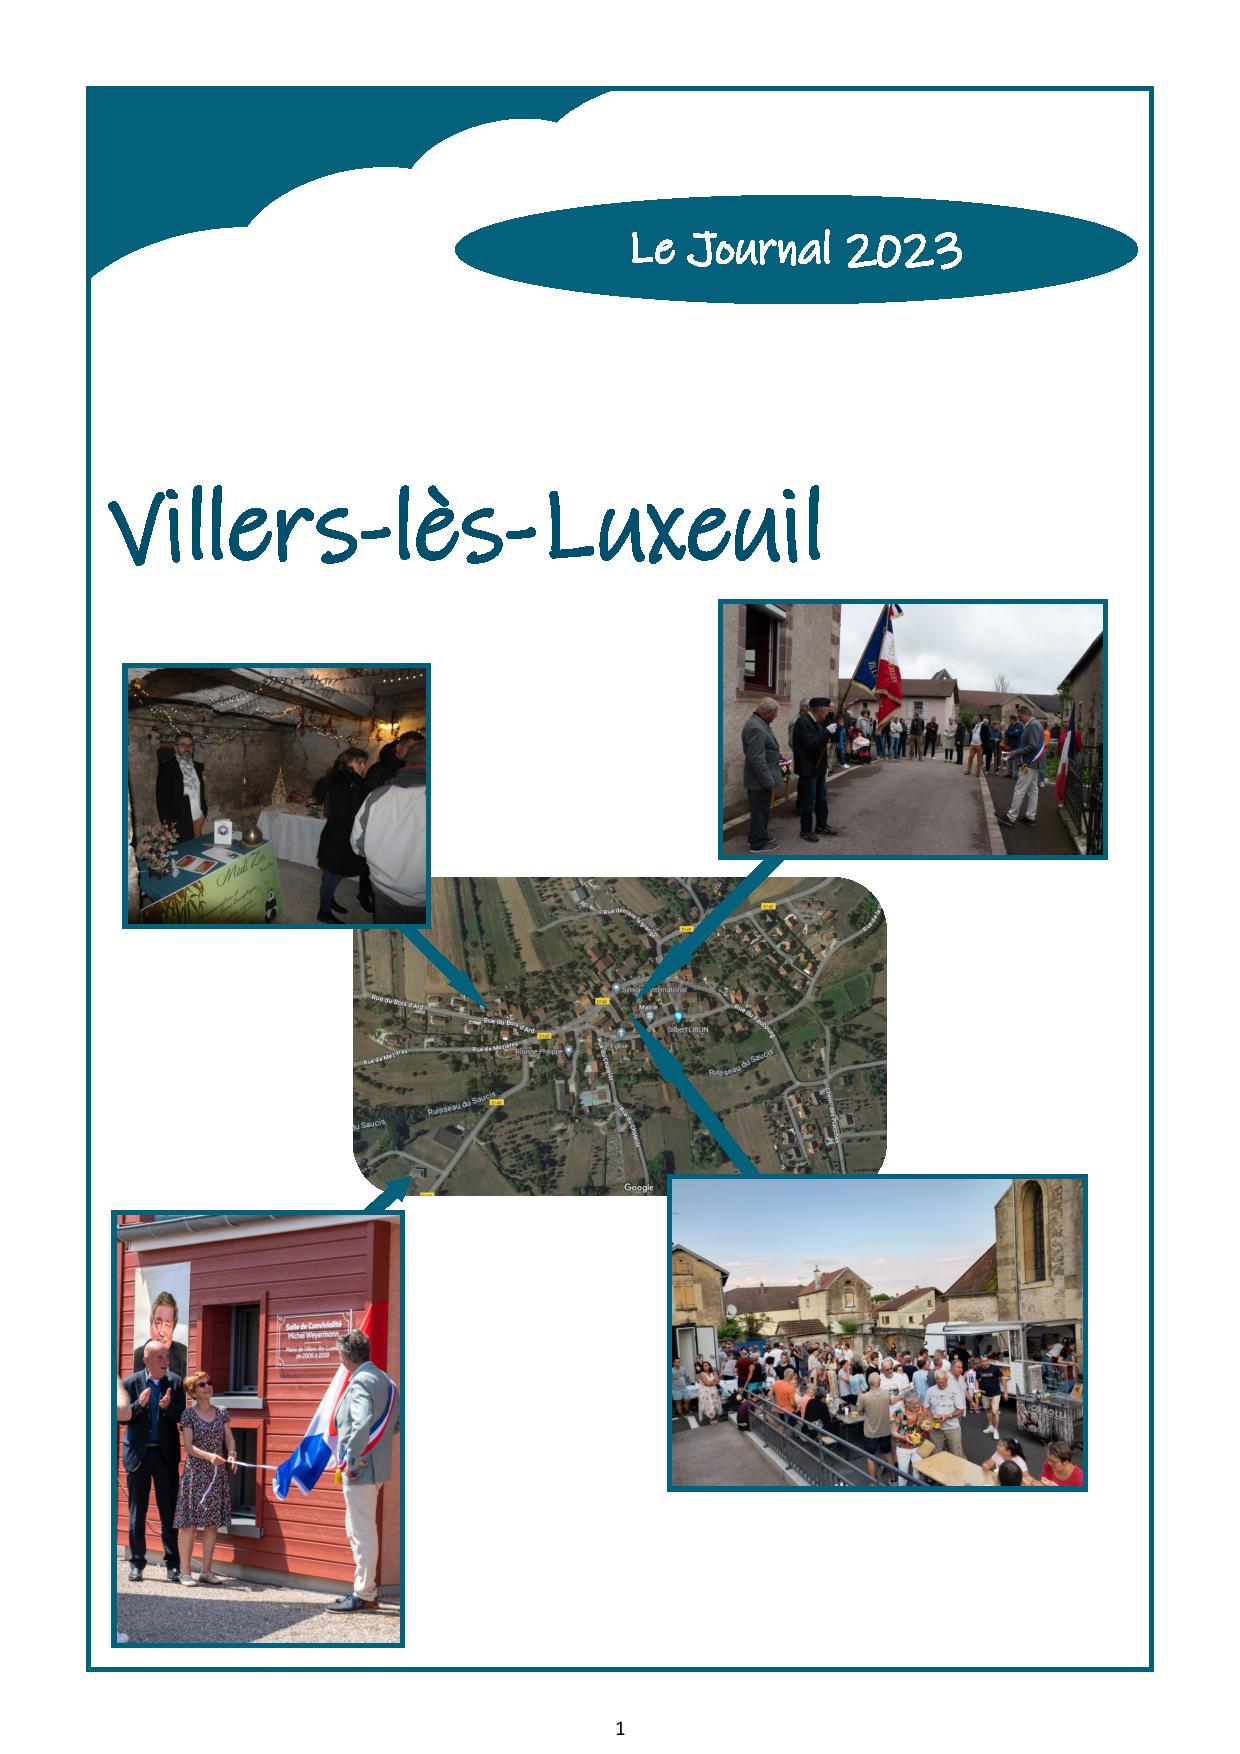 https://www.villers-les-luxeuil.com/projets/villers/files/images/2024_Mairie/voeux_mairie_2024_page_001.jpg